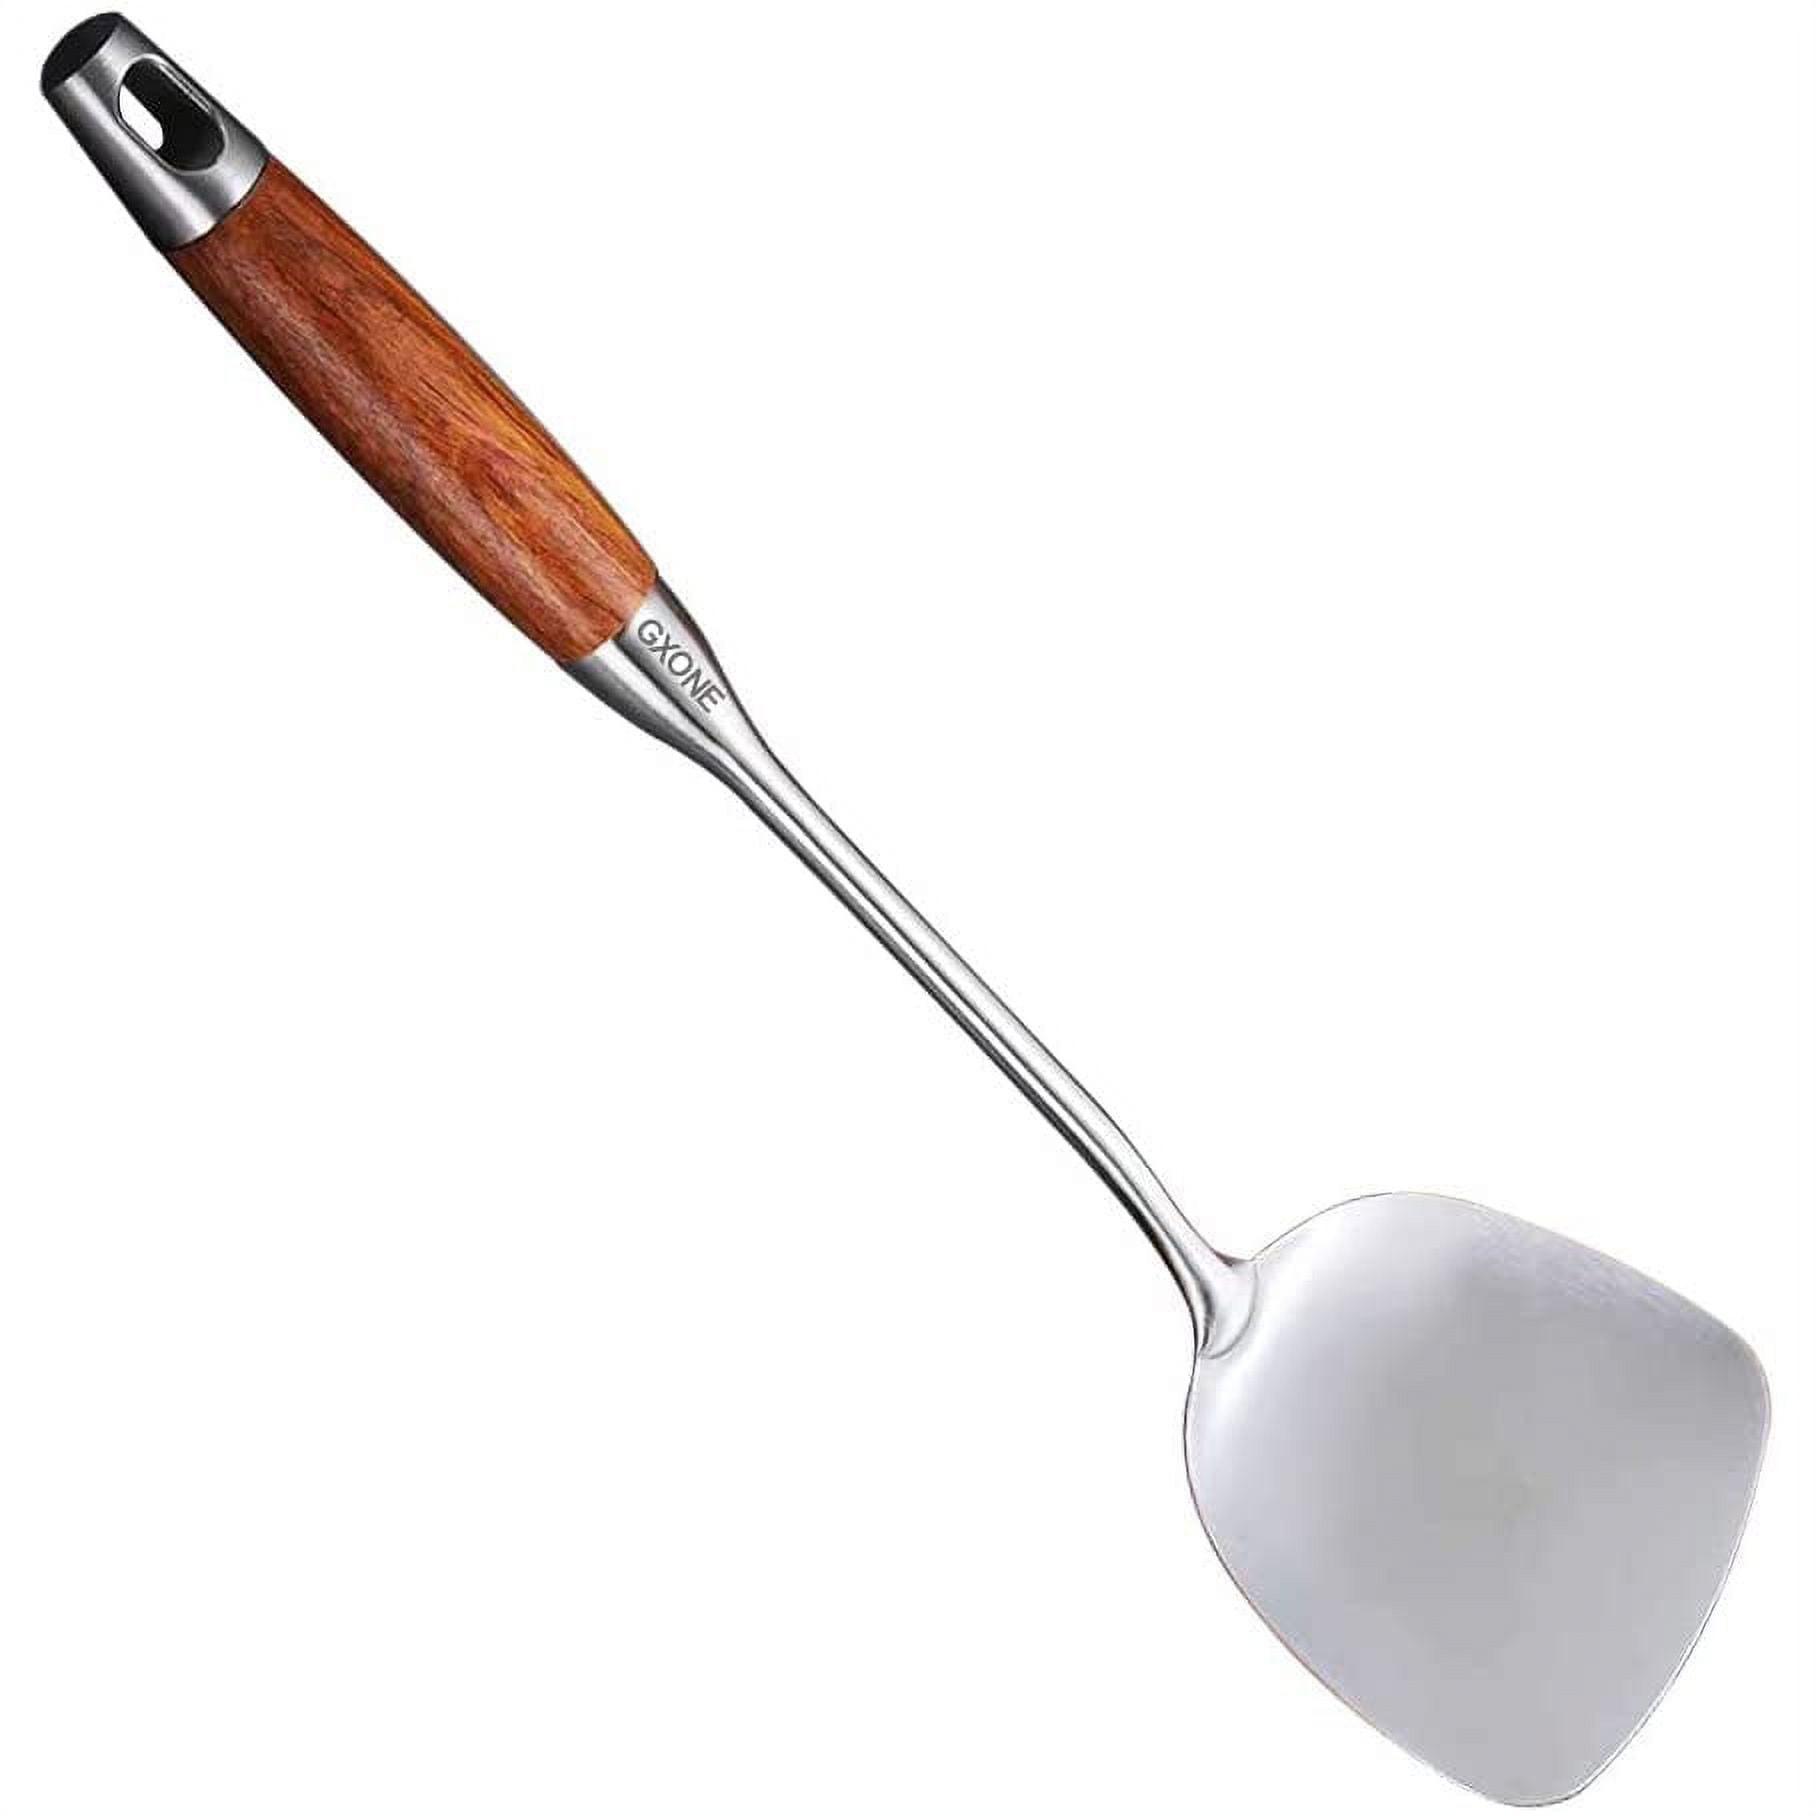 Multifunctional Heat-Resistant All in One Cooking Spoon – CargoCache